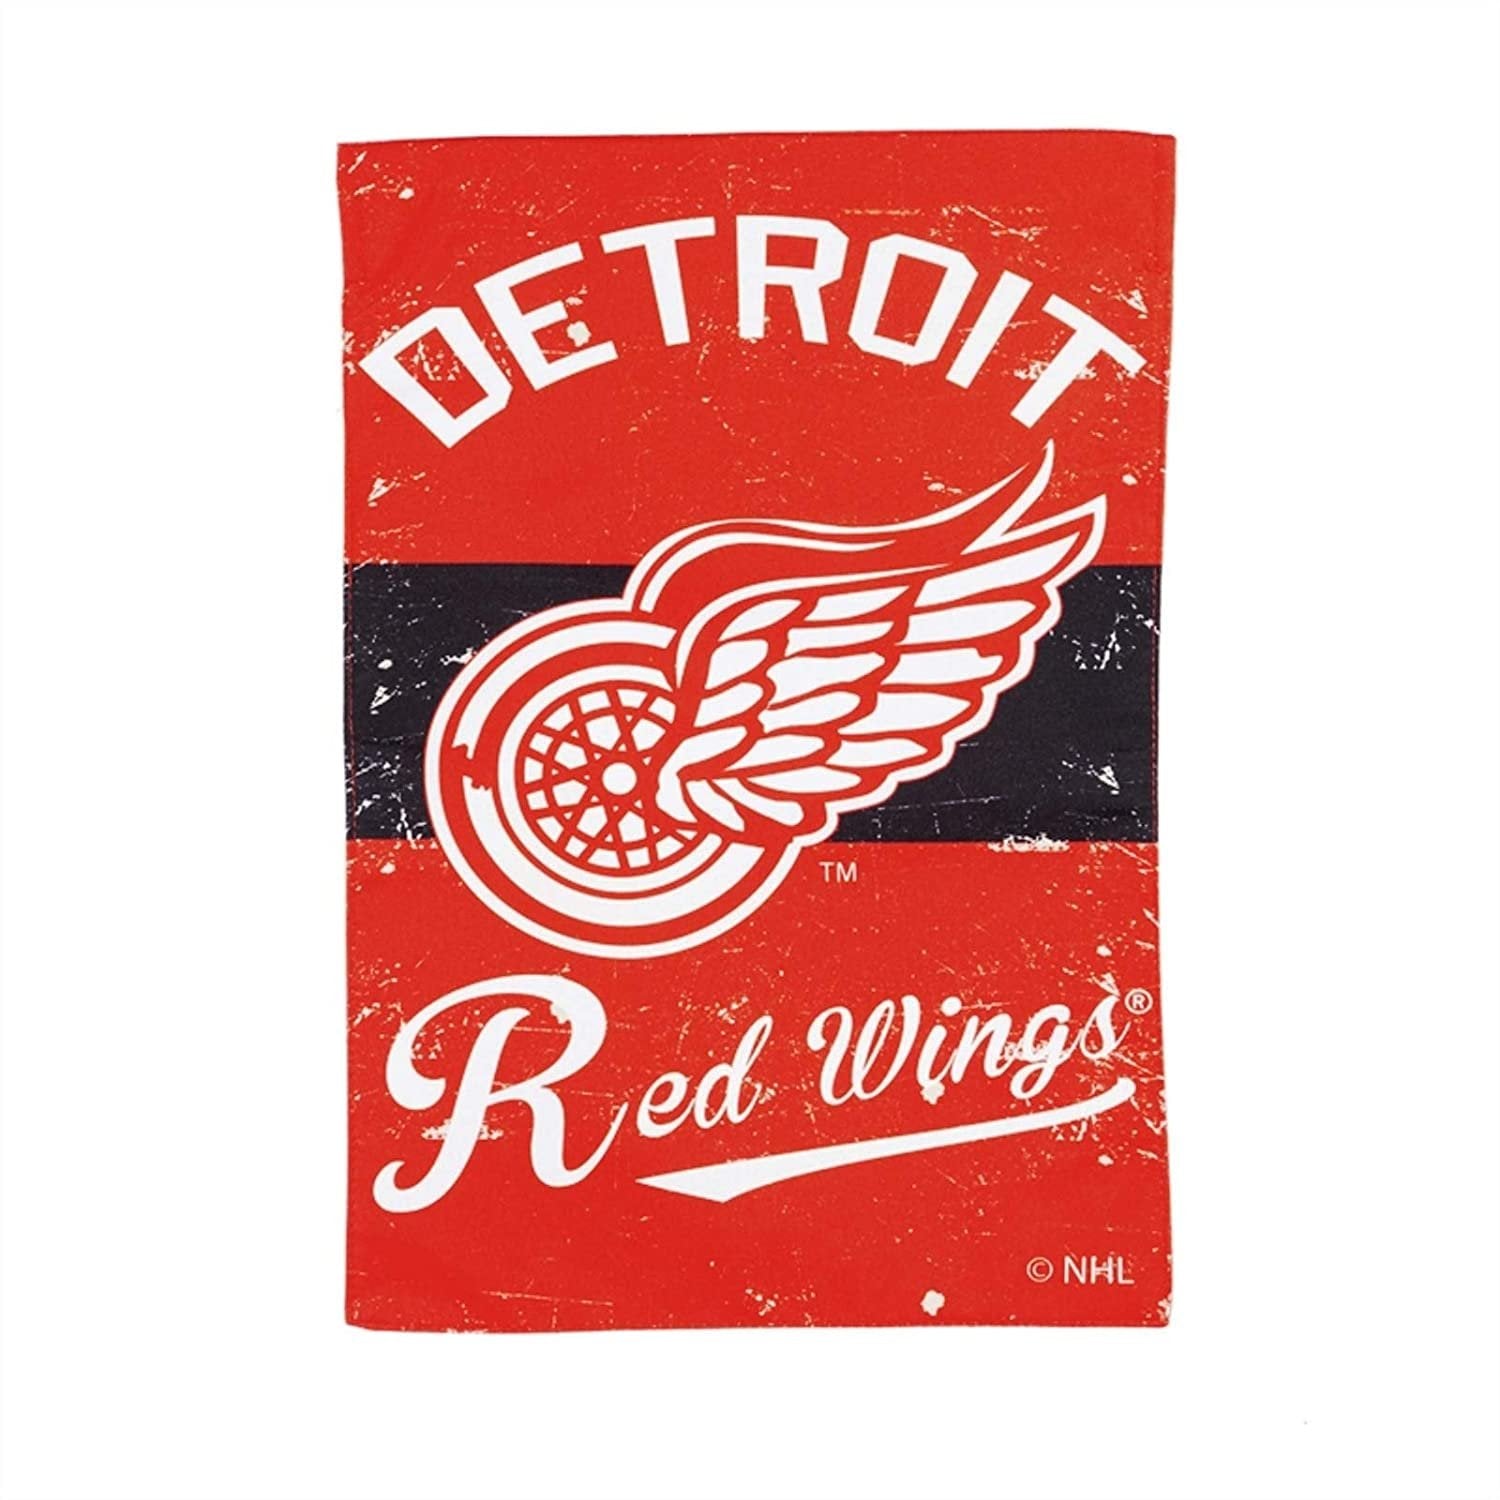 Detroit Red Wings Premium House Flag Banner, Double Sided, Retro Vintage Style, Linen, 28x44 Inch